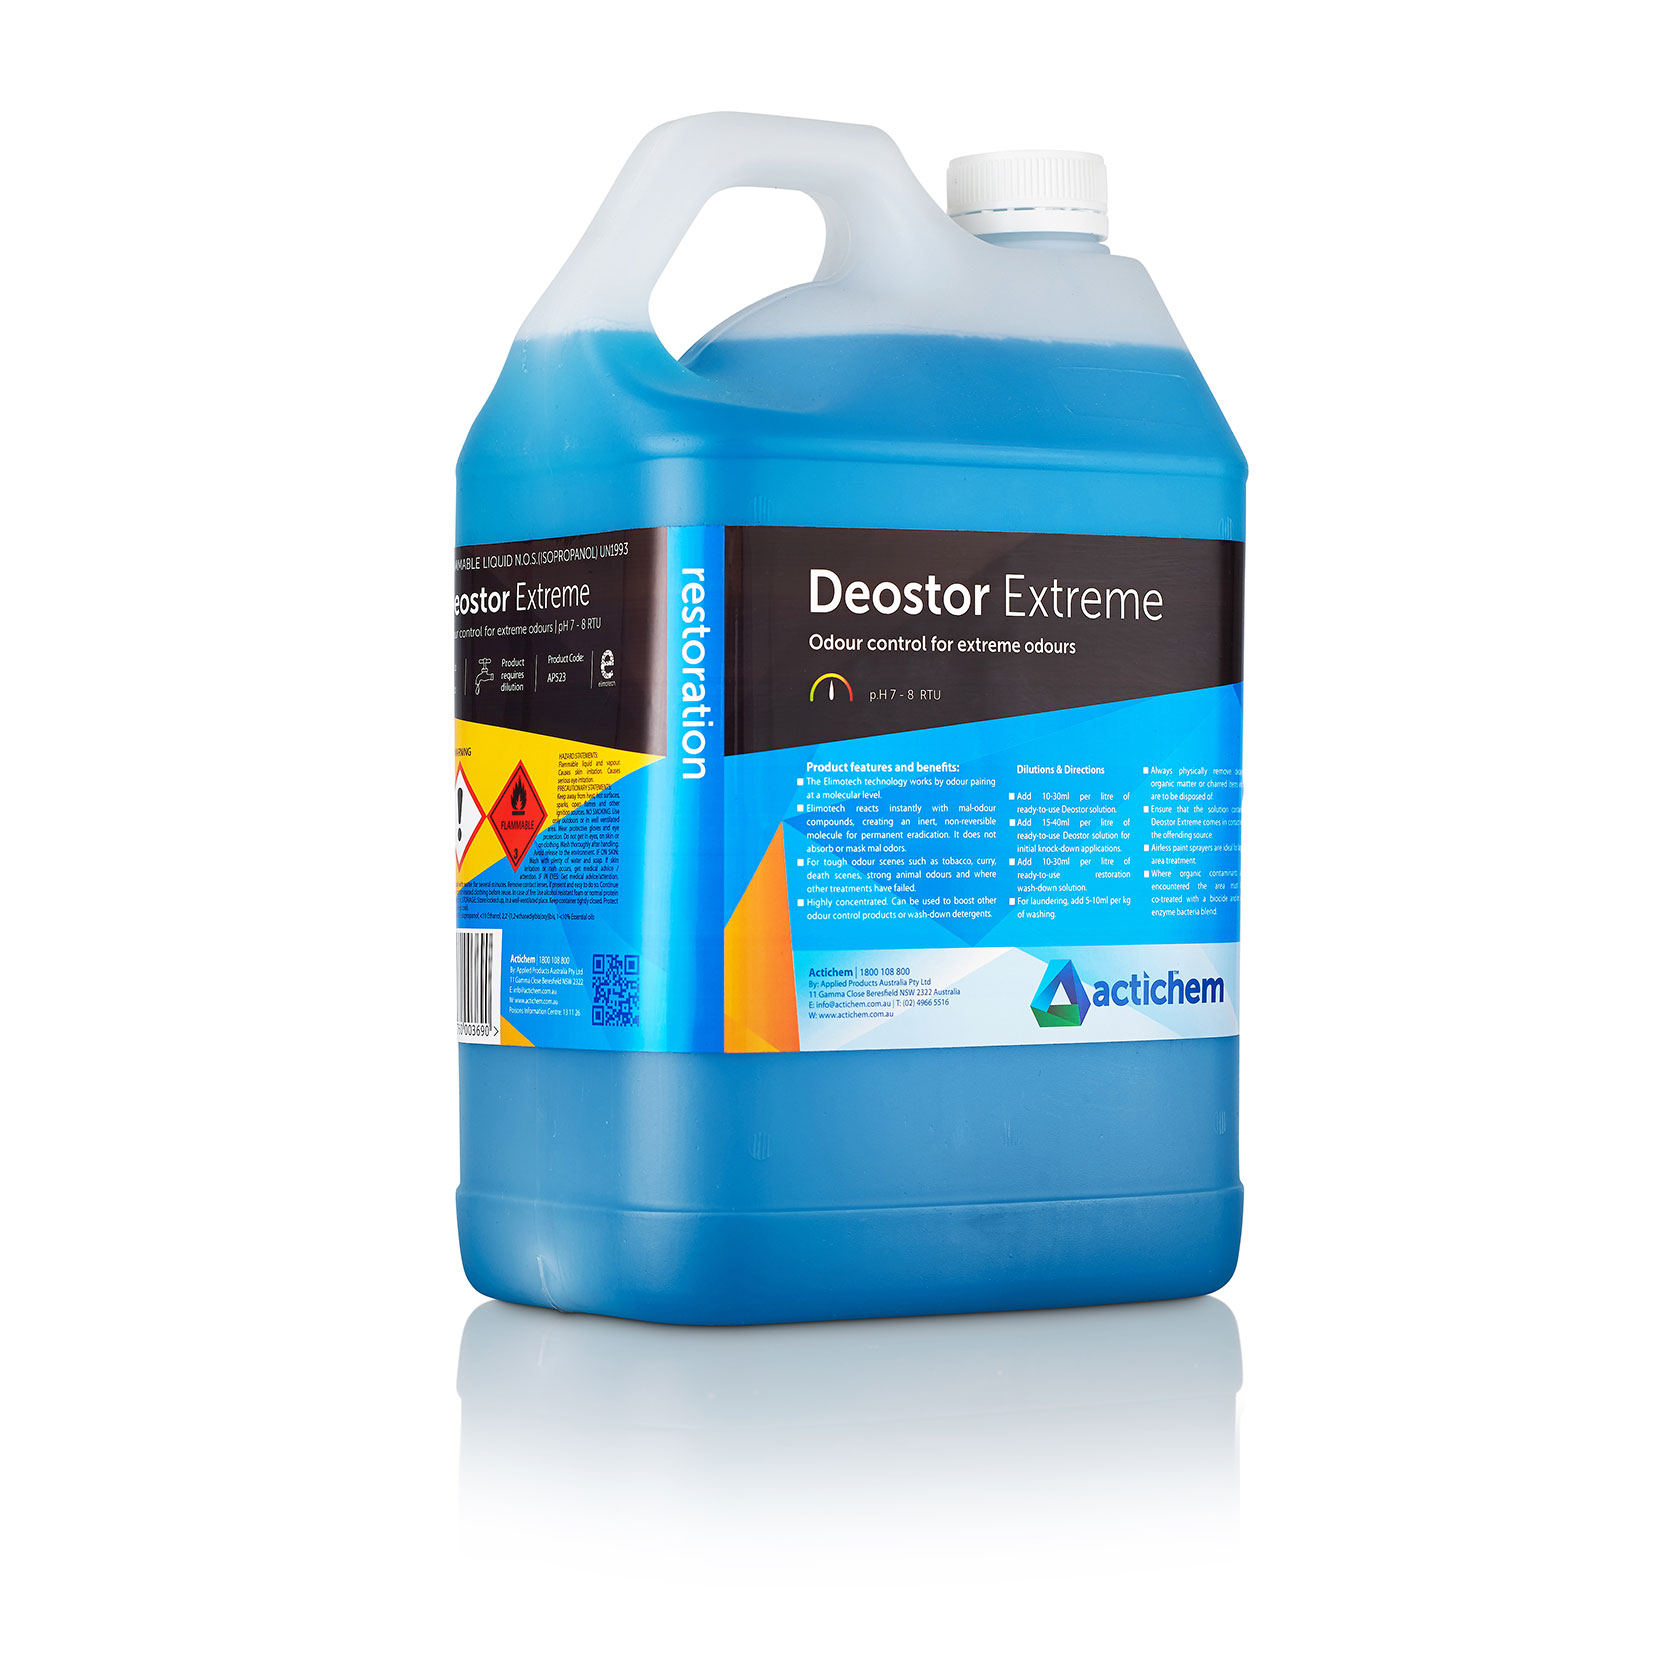 Actichem Deostor Extreme Enzyme based odour control